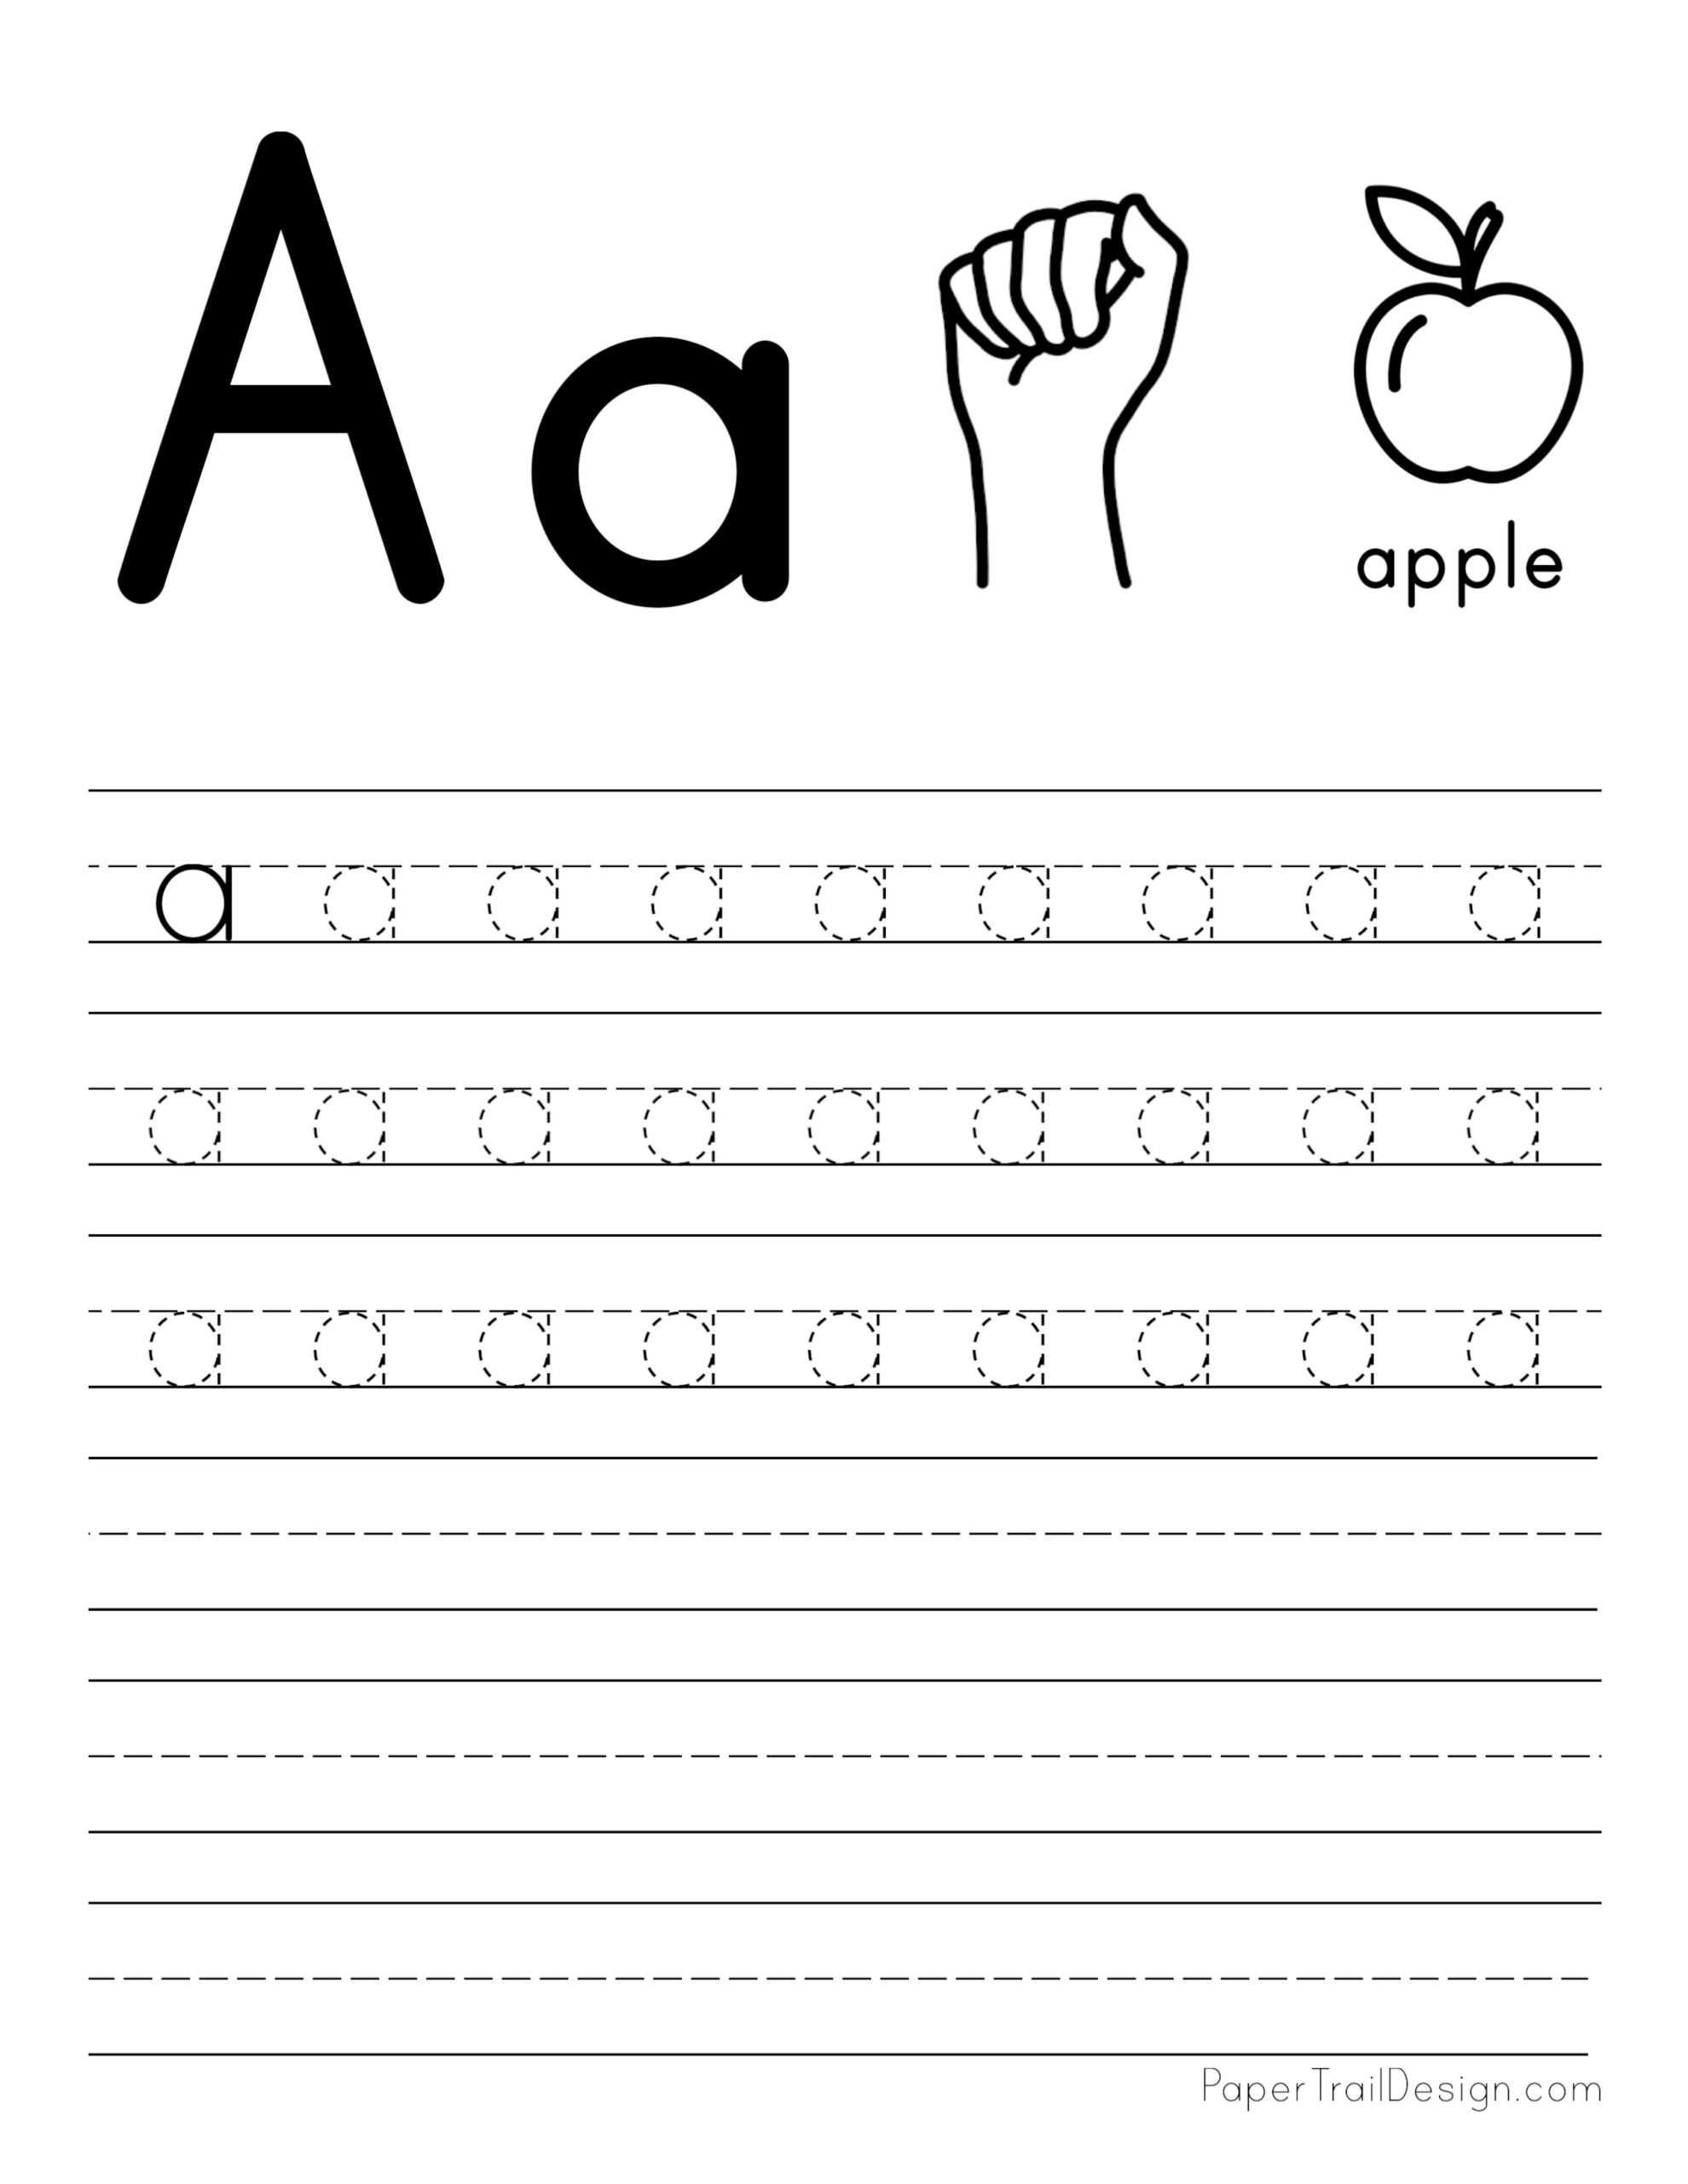 tracing-lowercase-letters-free-printable